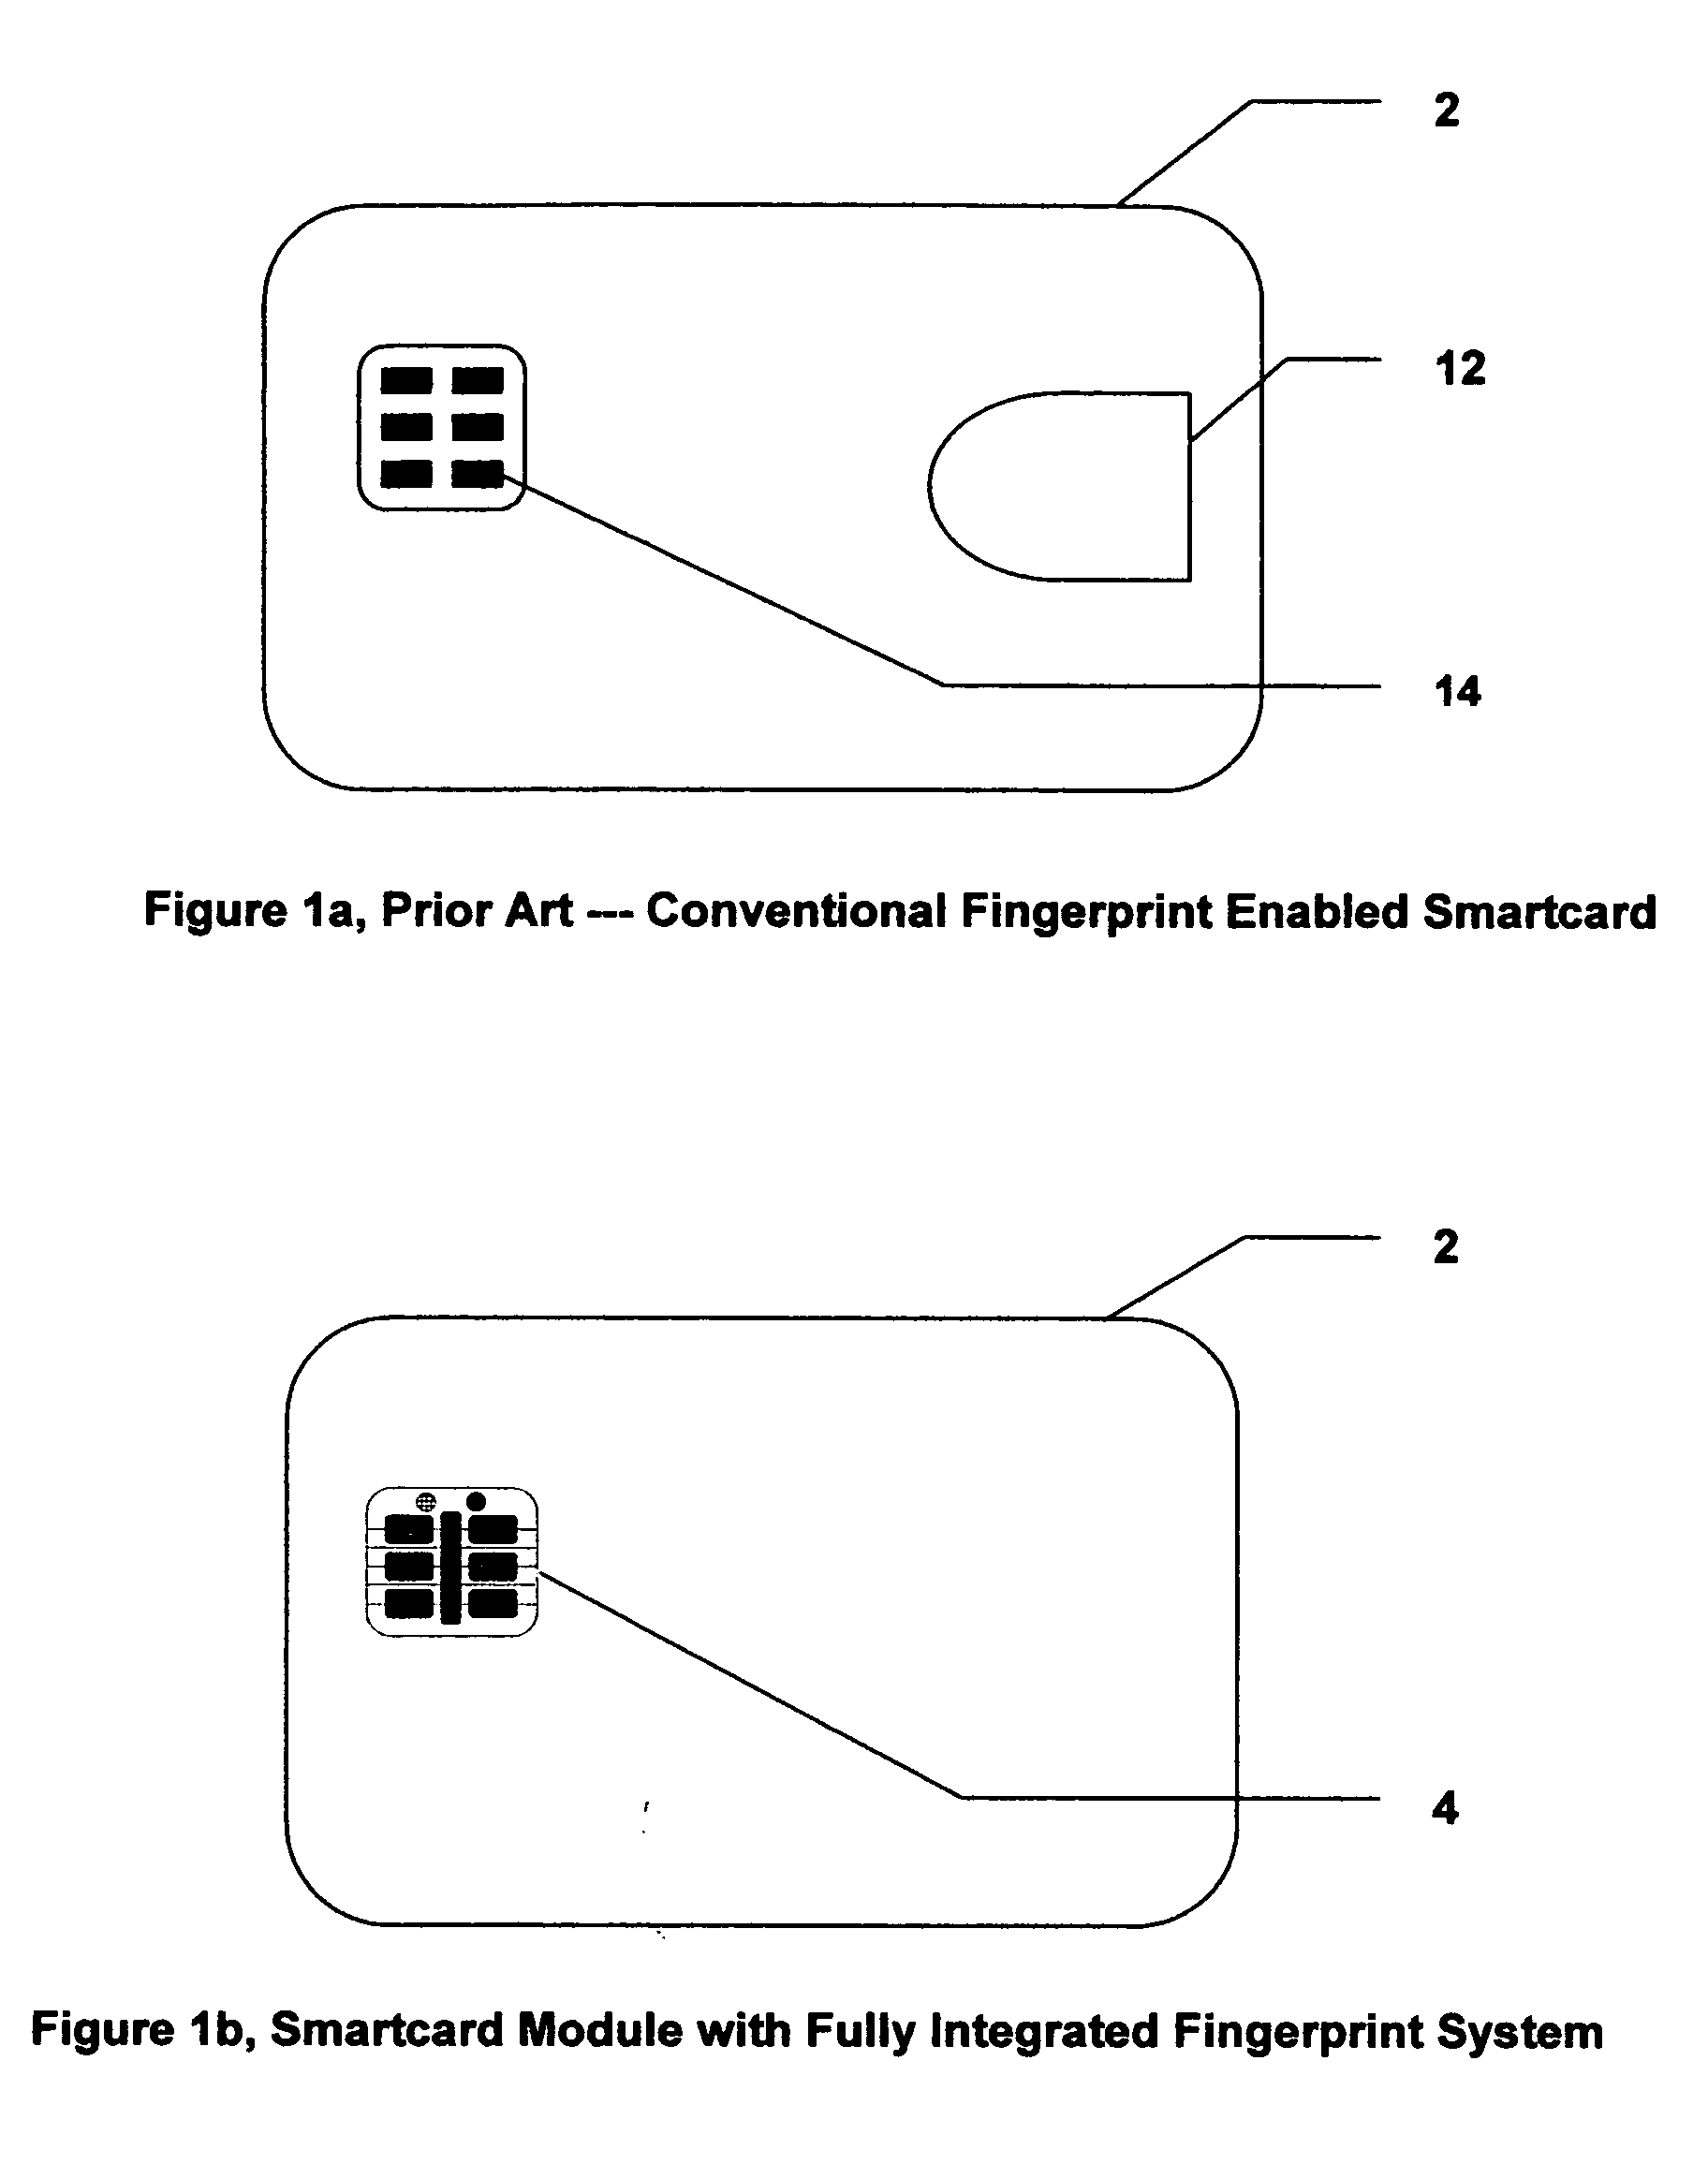 Design & method for manufacturing low-cost smartcards with embedded fingerprint authentication system modules